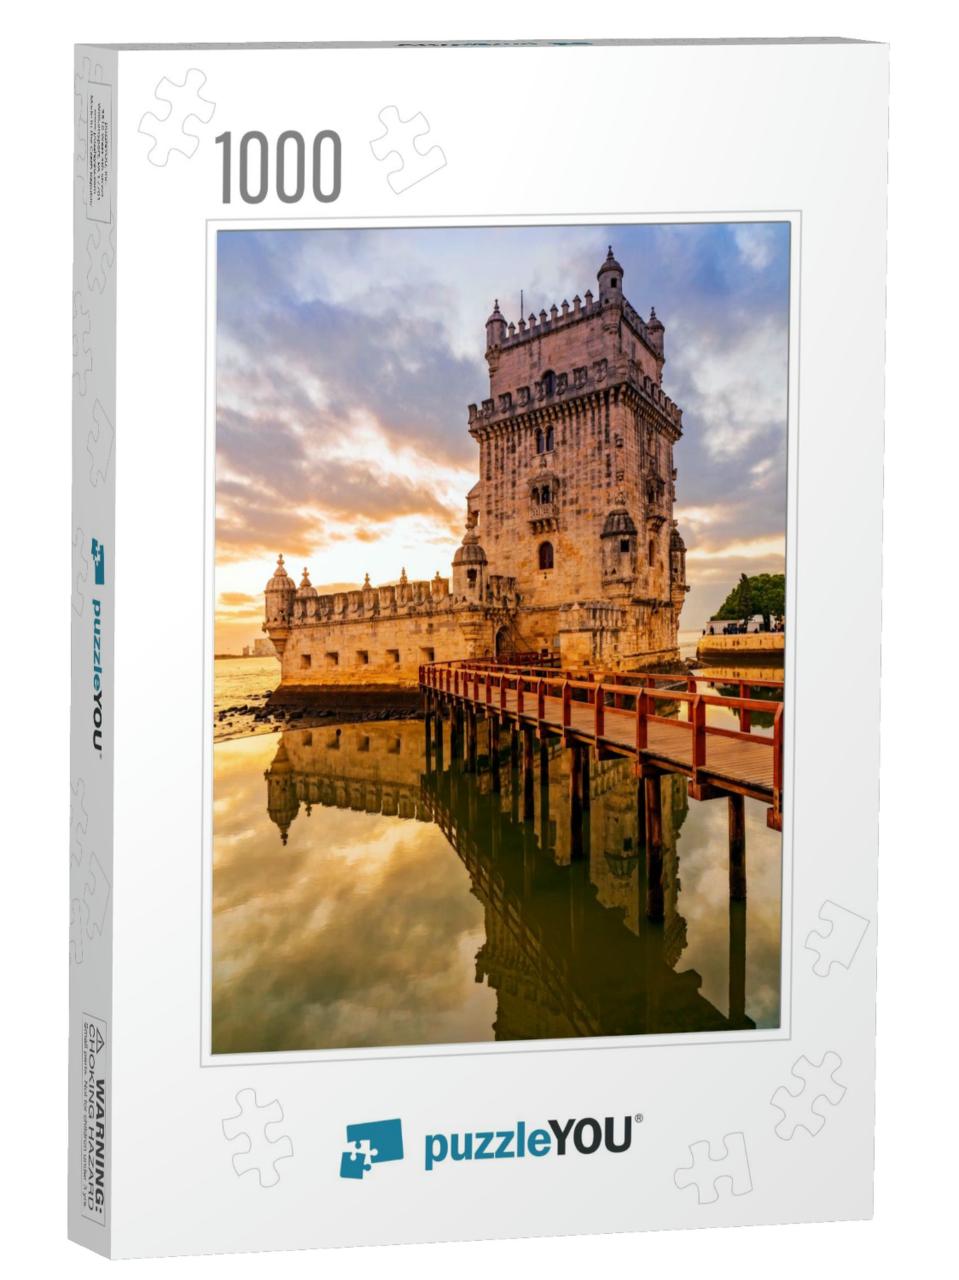 Belem Tower At Sunset in Lisbon, Portugal... Jigsaw Puzzle with 1000 pieces